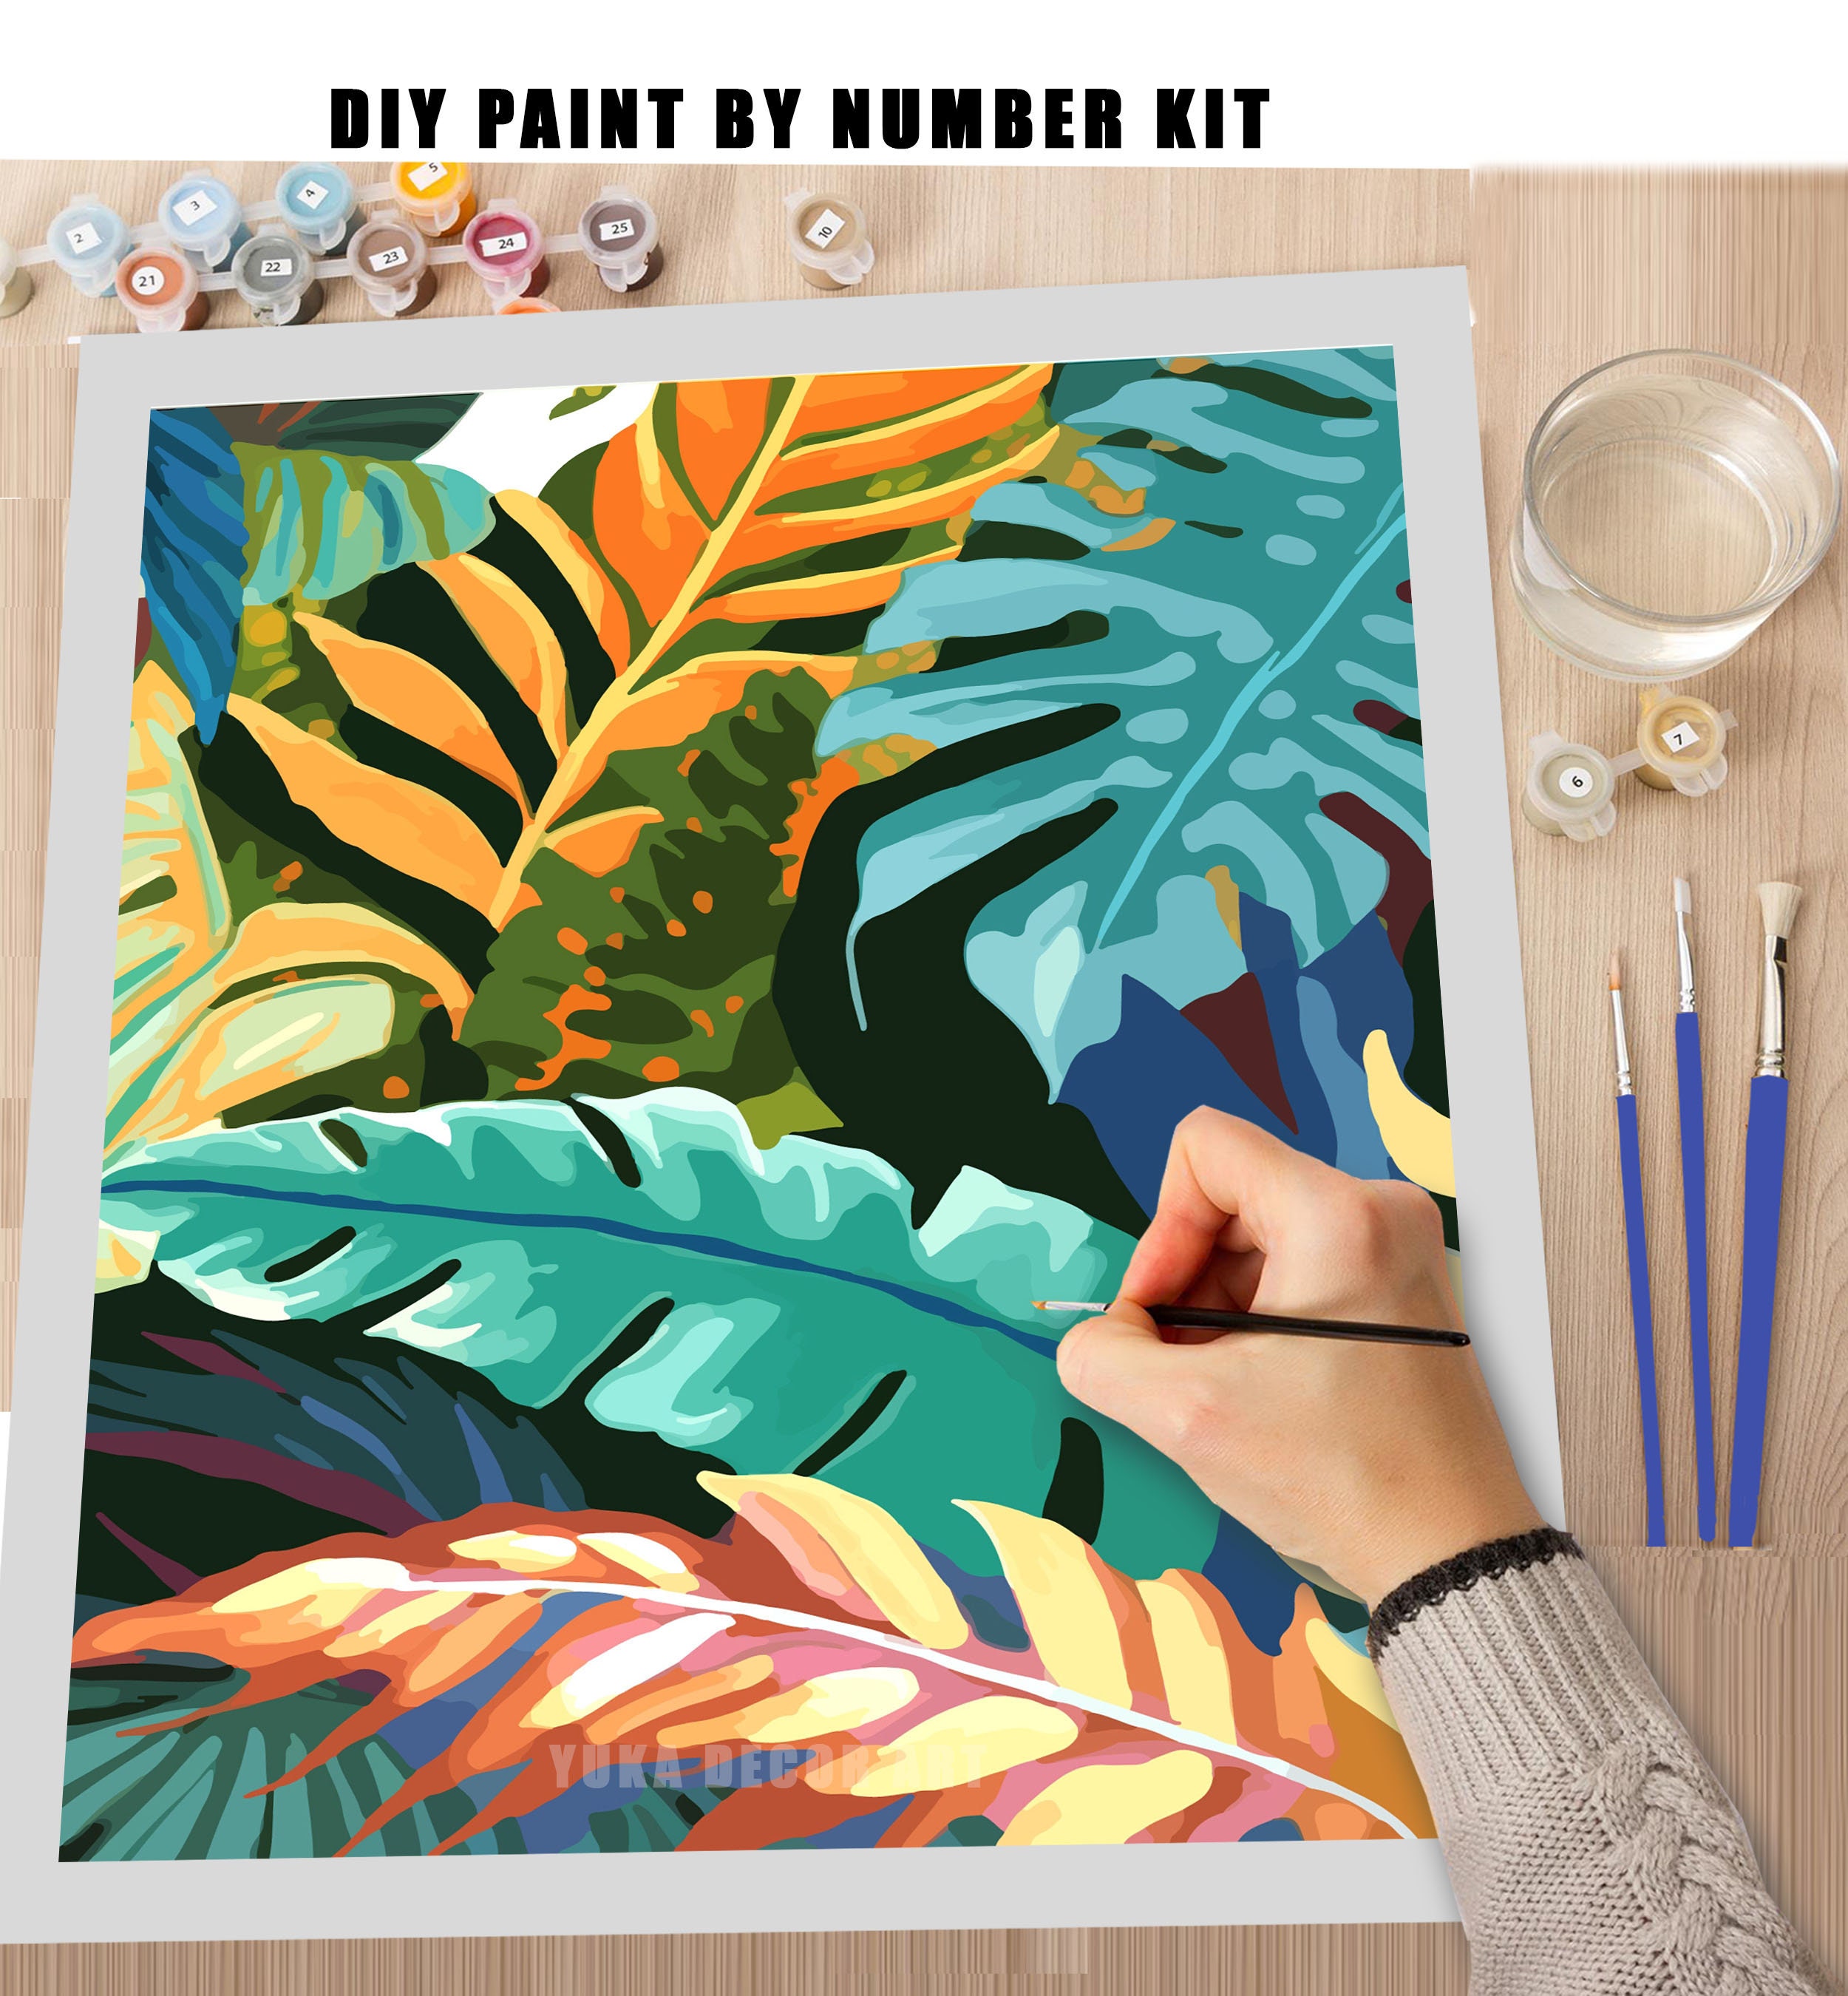 Paint By Number Kit for Adults - Green Door - DIY Painting By